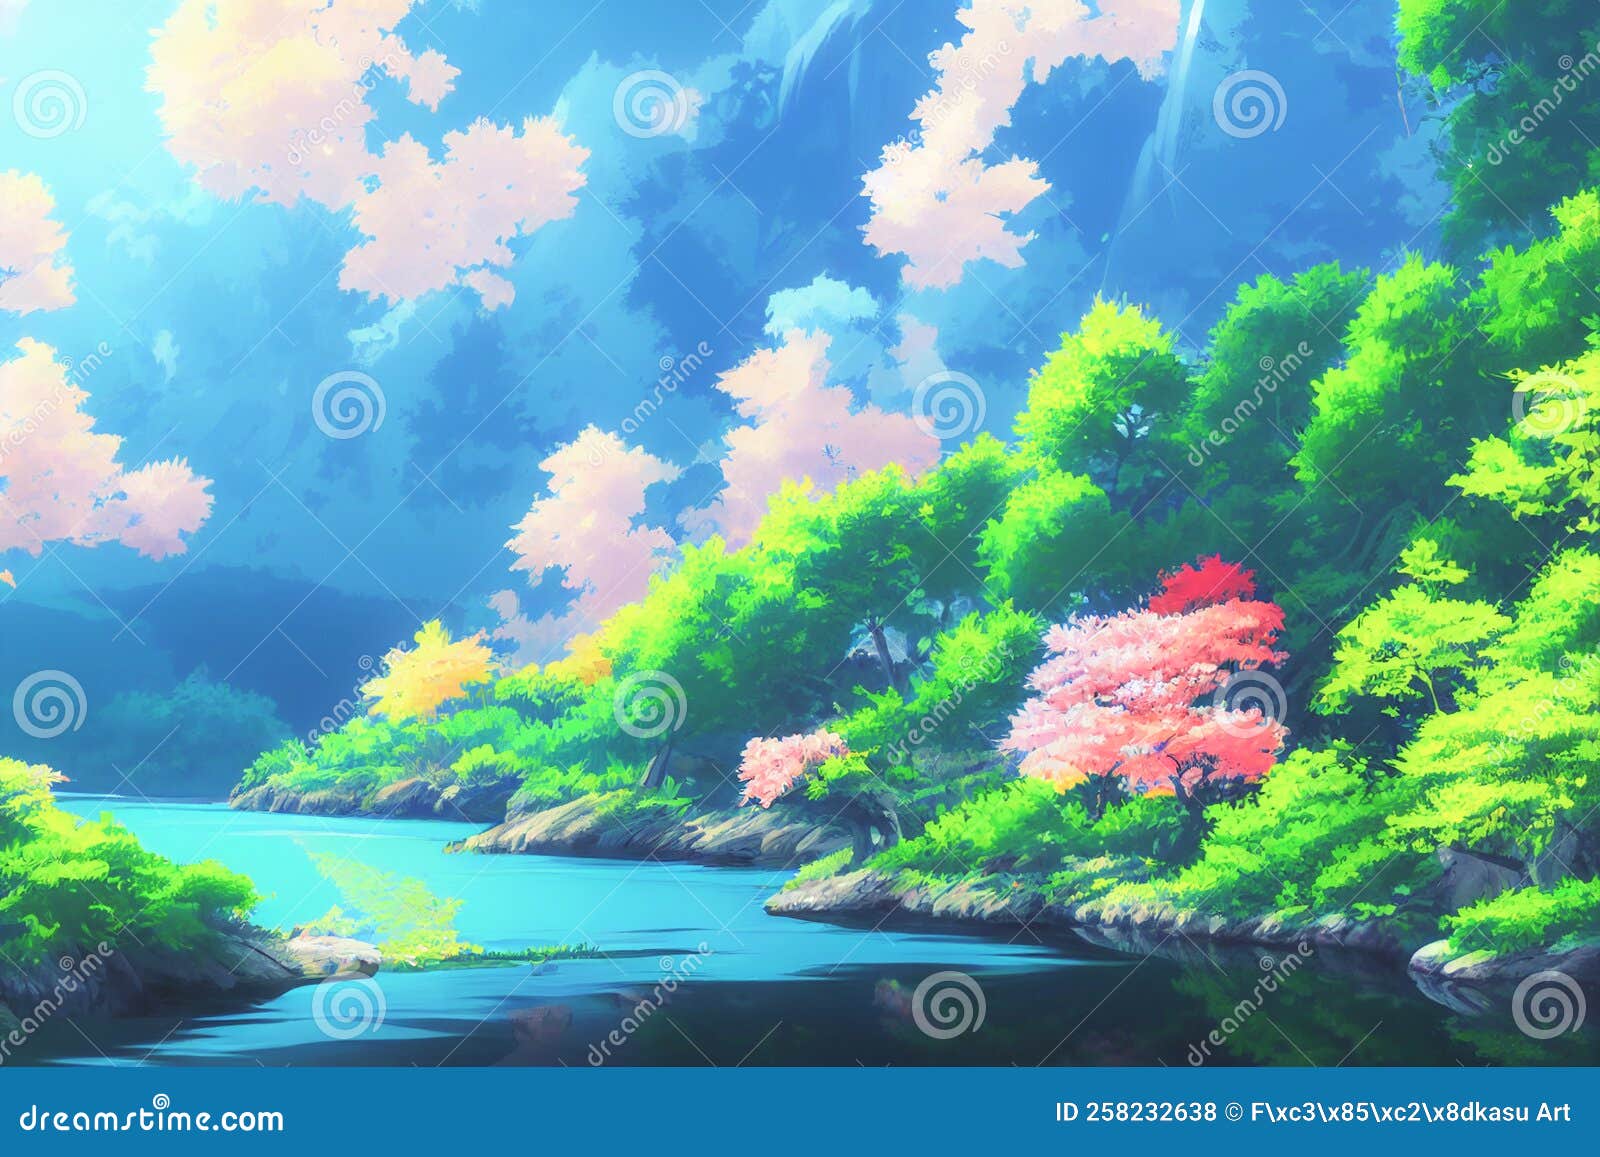 Cute Anime Scenery Wallpapers - Wallpaper Cave